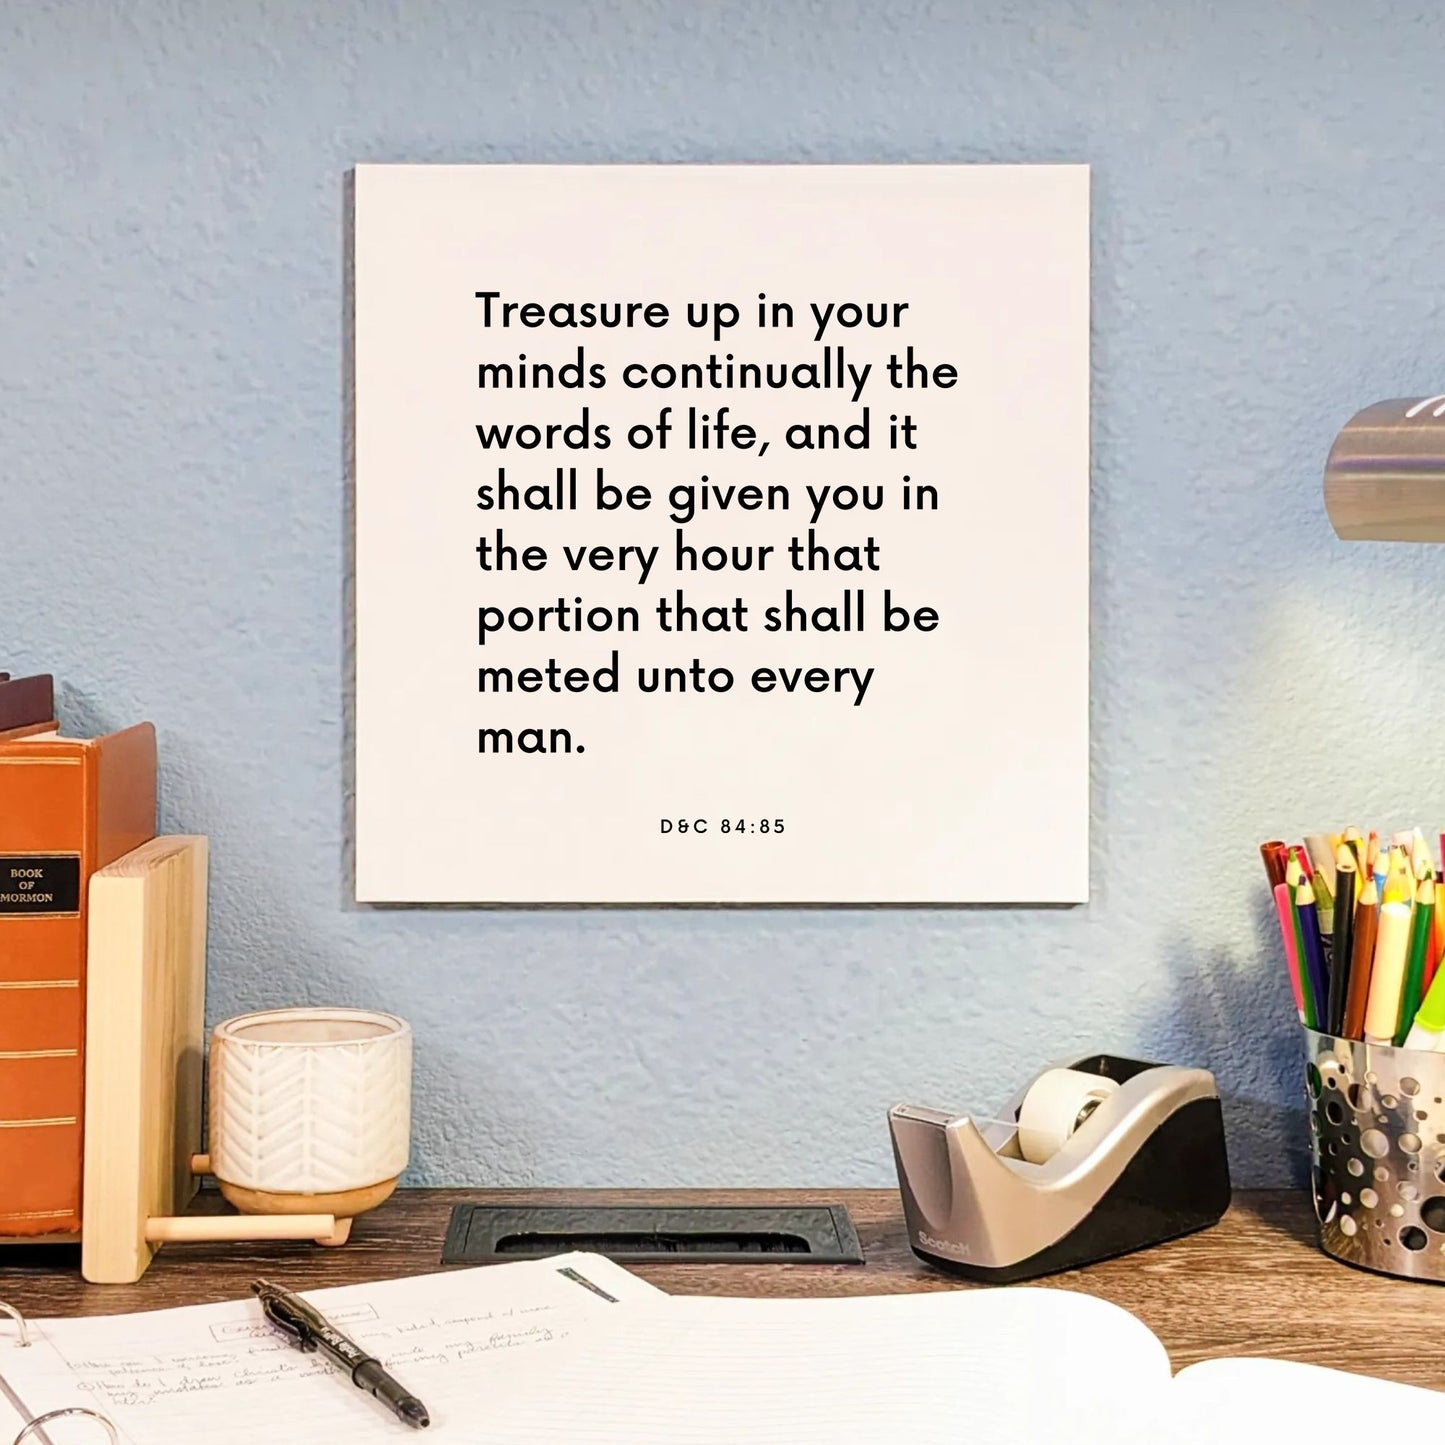 Desk mouting of the scripture tile for D&C 84:85 - "Treasure up in your minds continually the words of life"